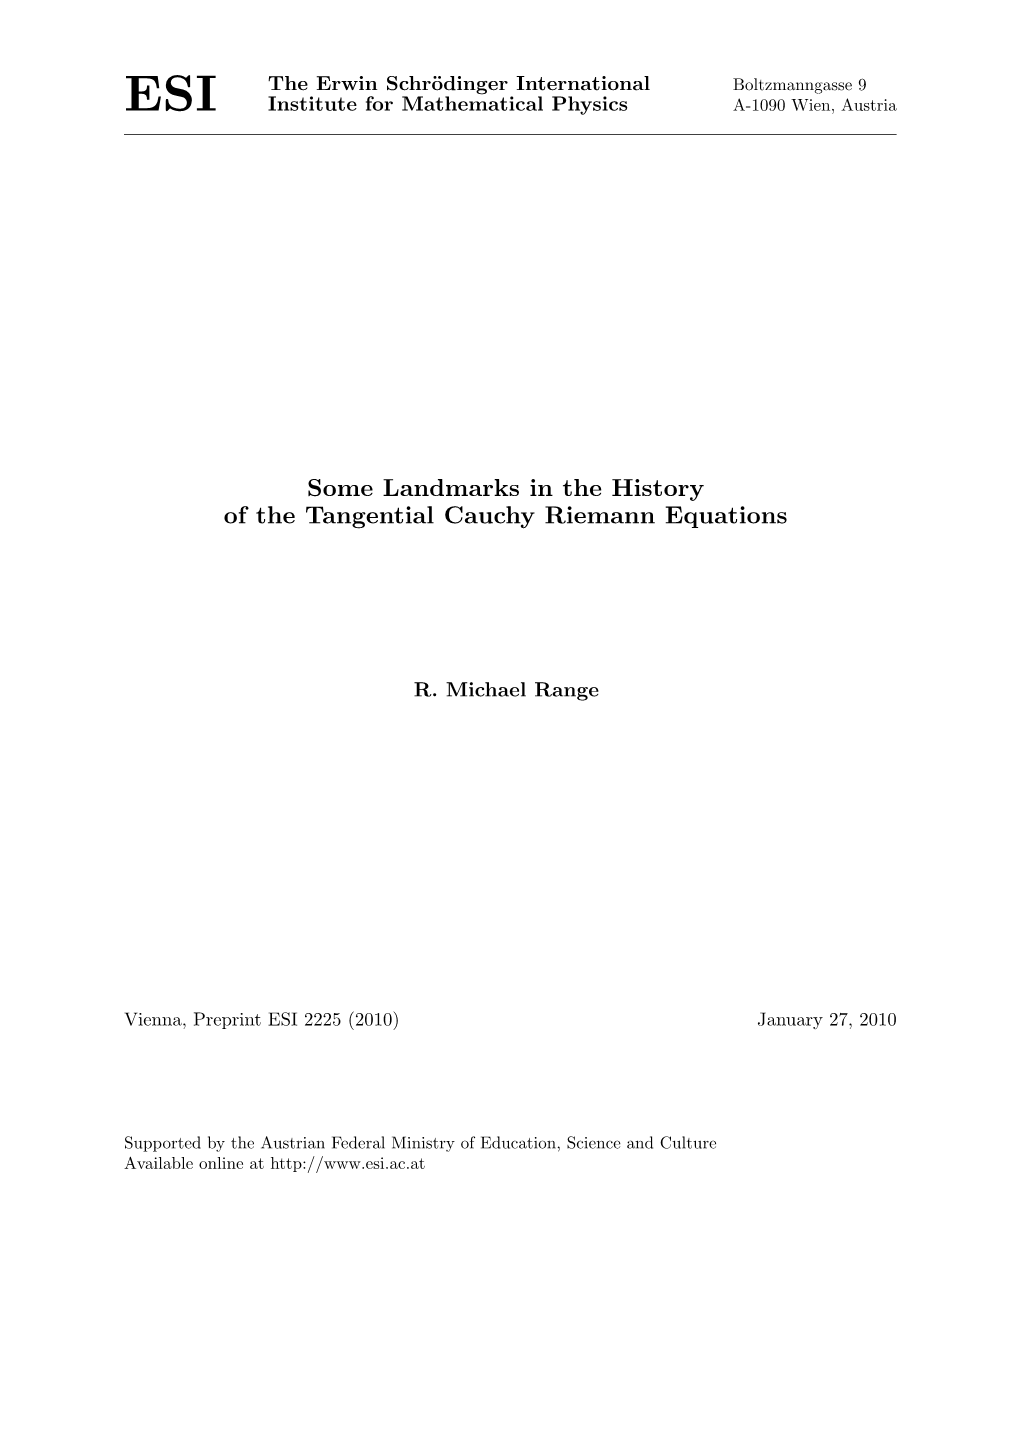 Some Landmarks in the History of the Tangential Cauchy Riemann Equations